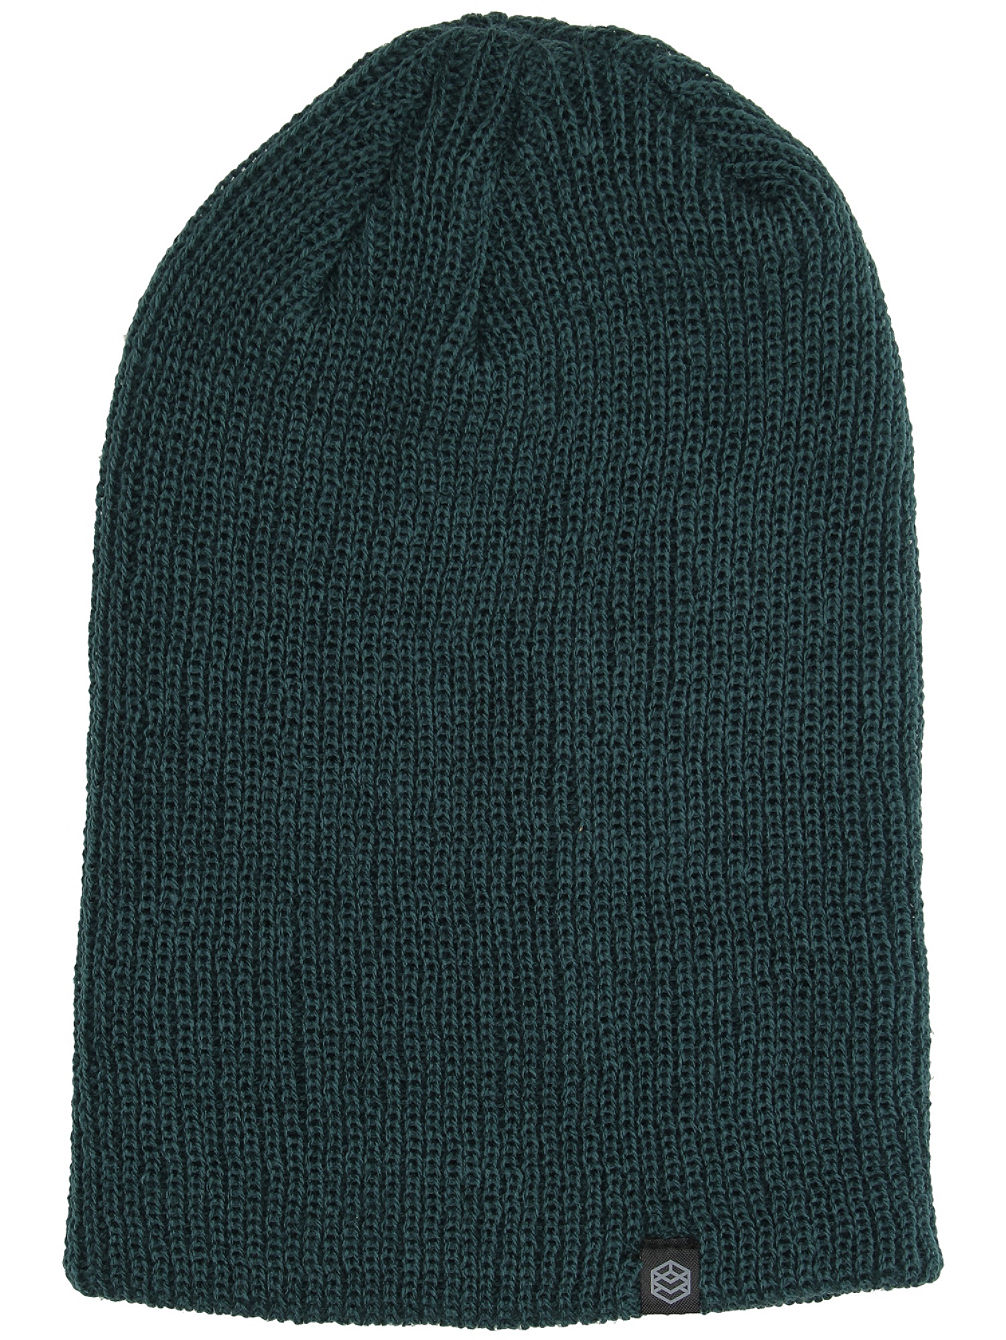 Toque Knit Slouch Muts